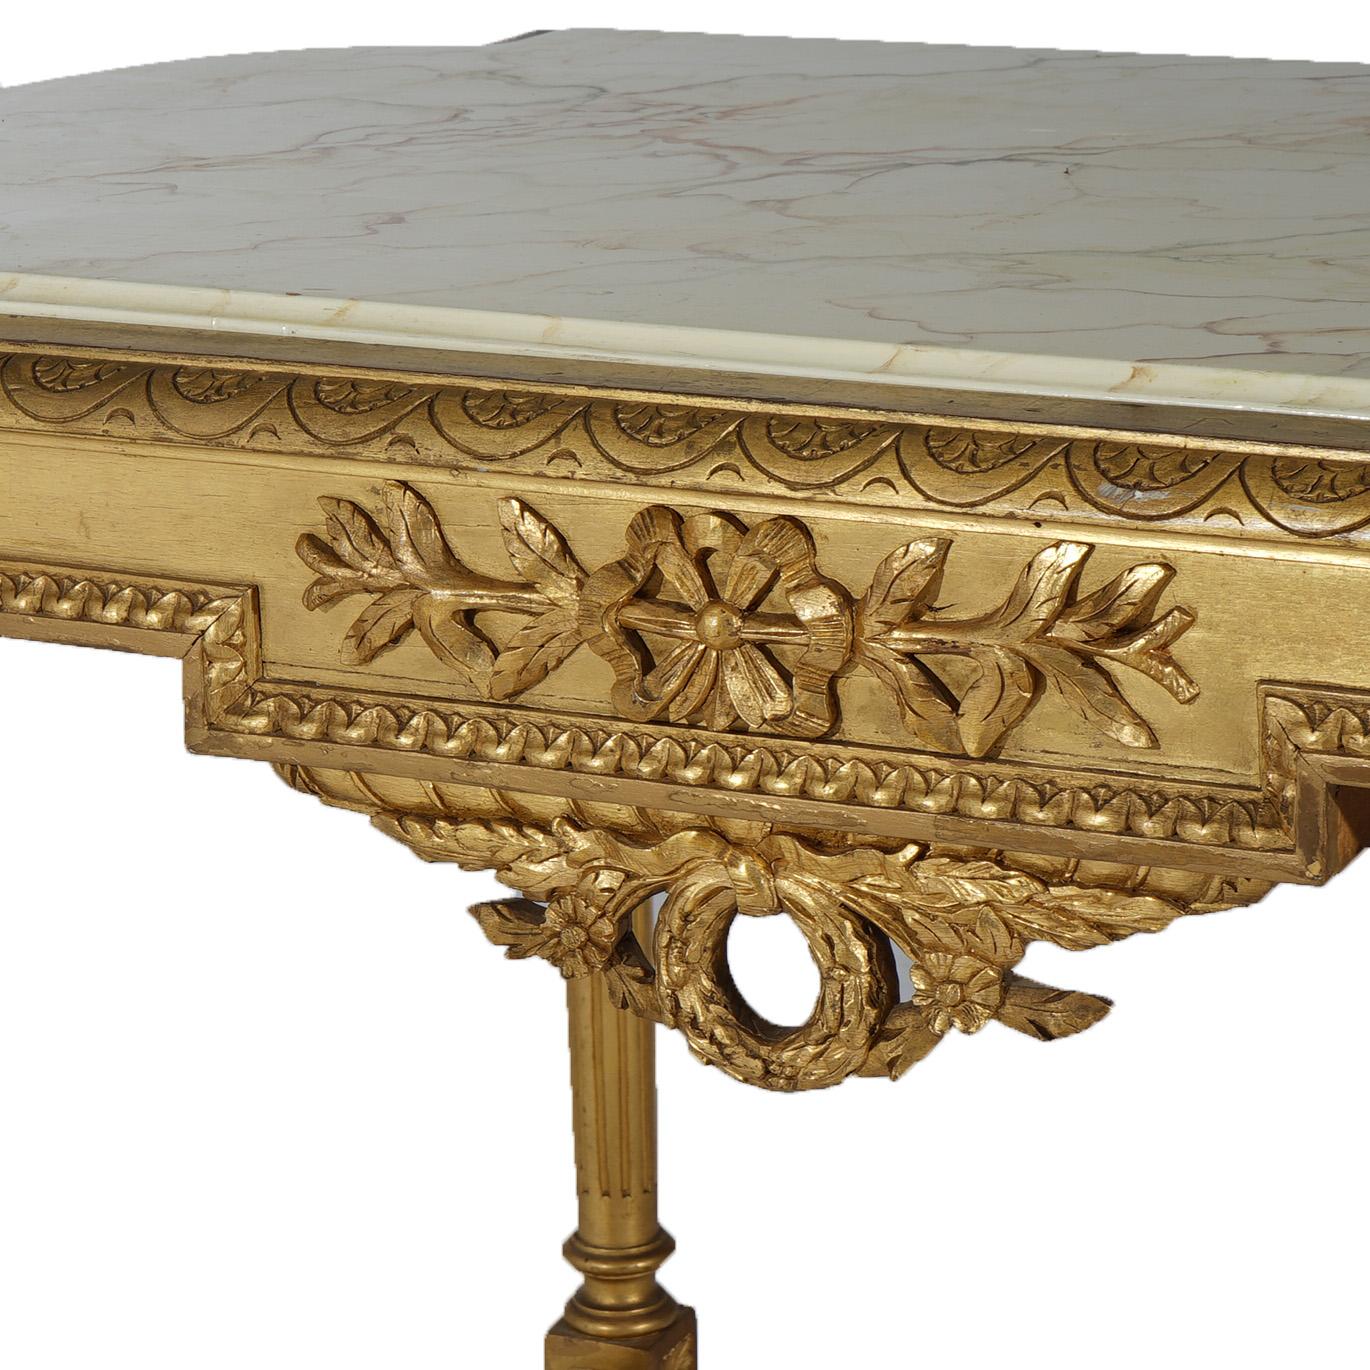 Antique French Louis XVI Style Giltwood Parlor Table with Faux Painted Top 19thC In Good Condition For Sale In Big Flats, NY